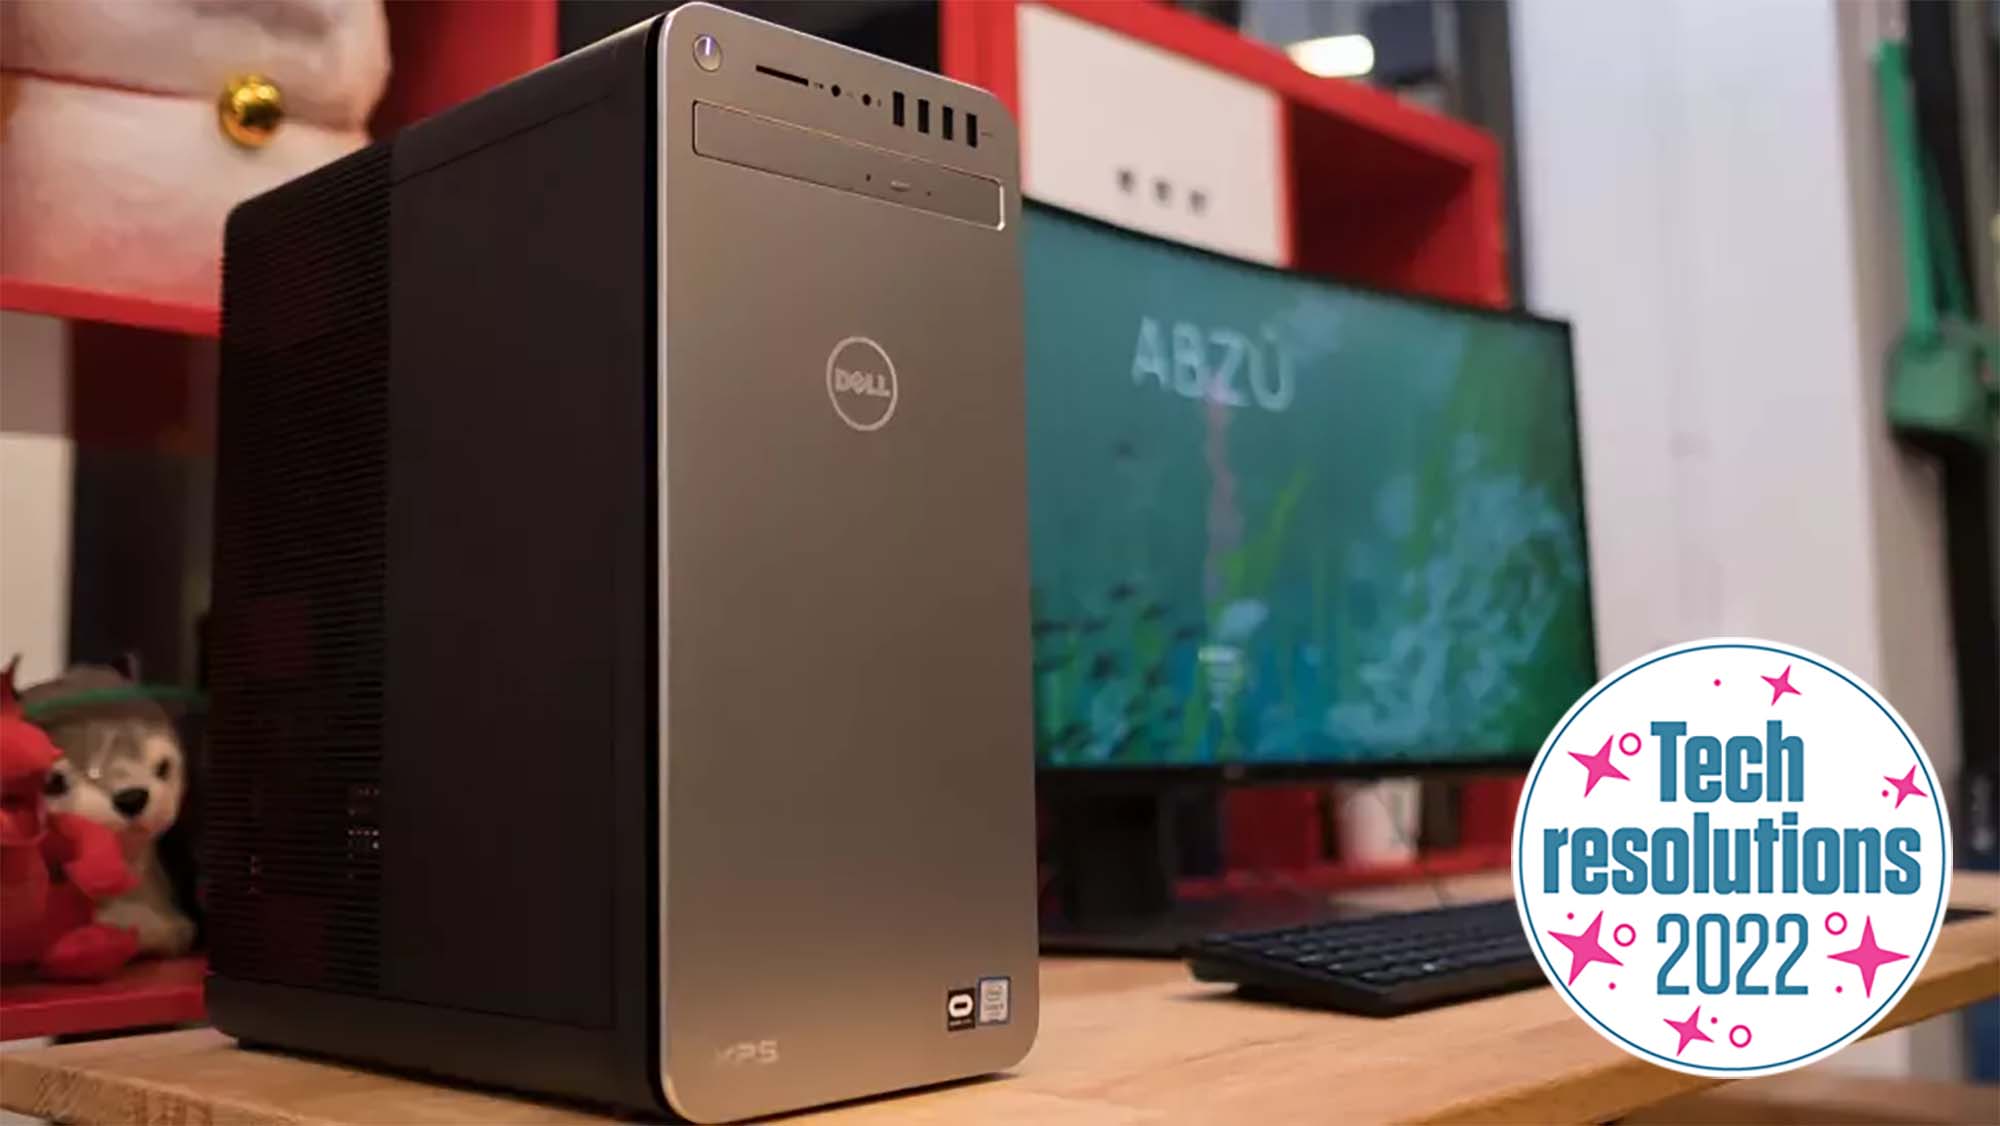 An idle Dell XPS tower on a desk with a TechRadar Tech Resolutions 2021 badge in the corner